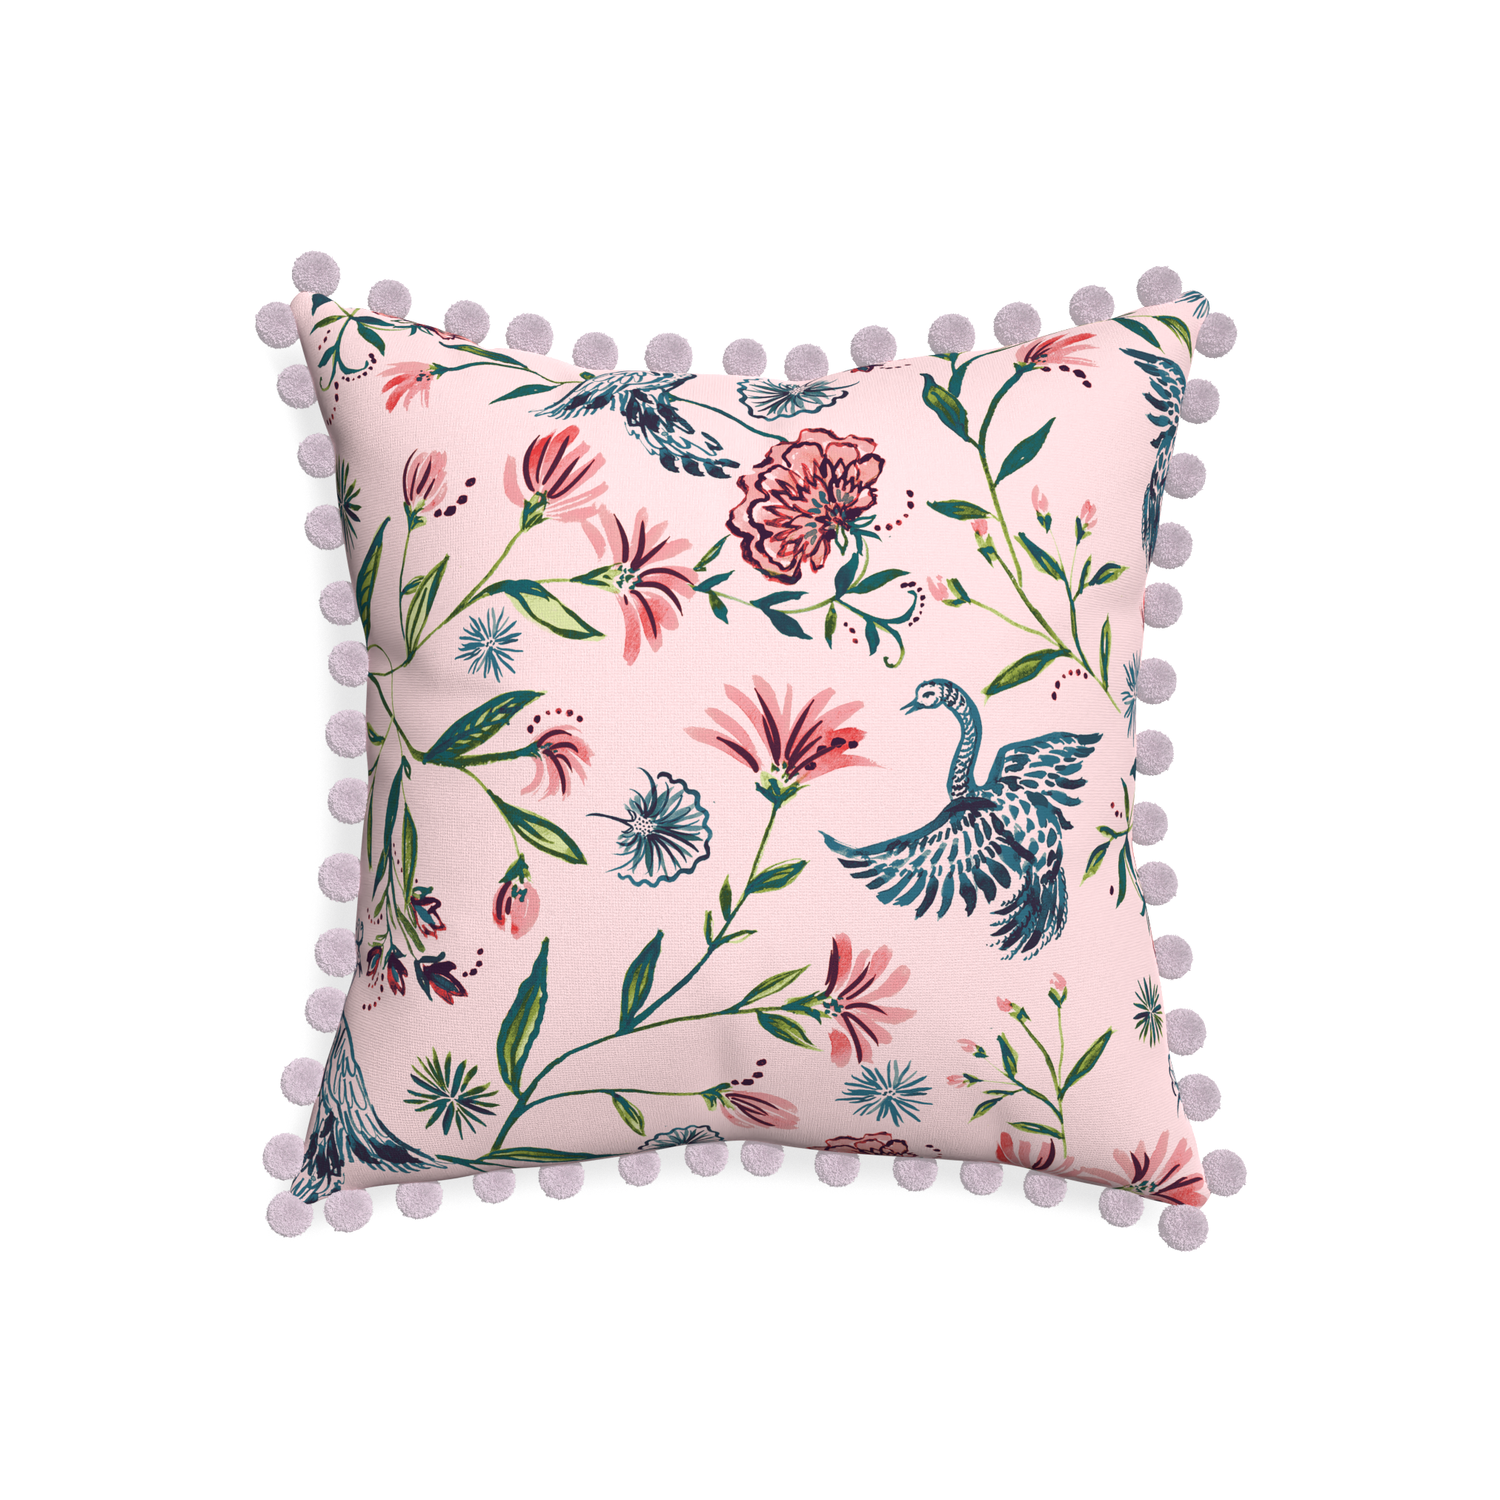 20-square daphne rose custom pillow with l on white background